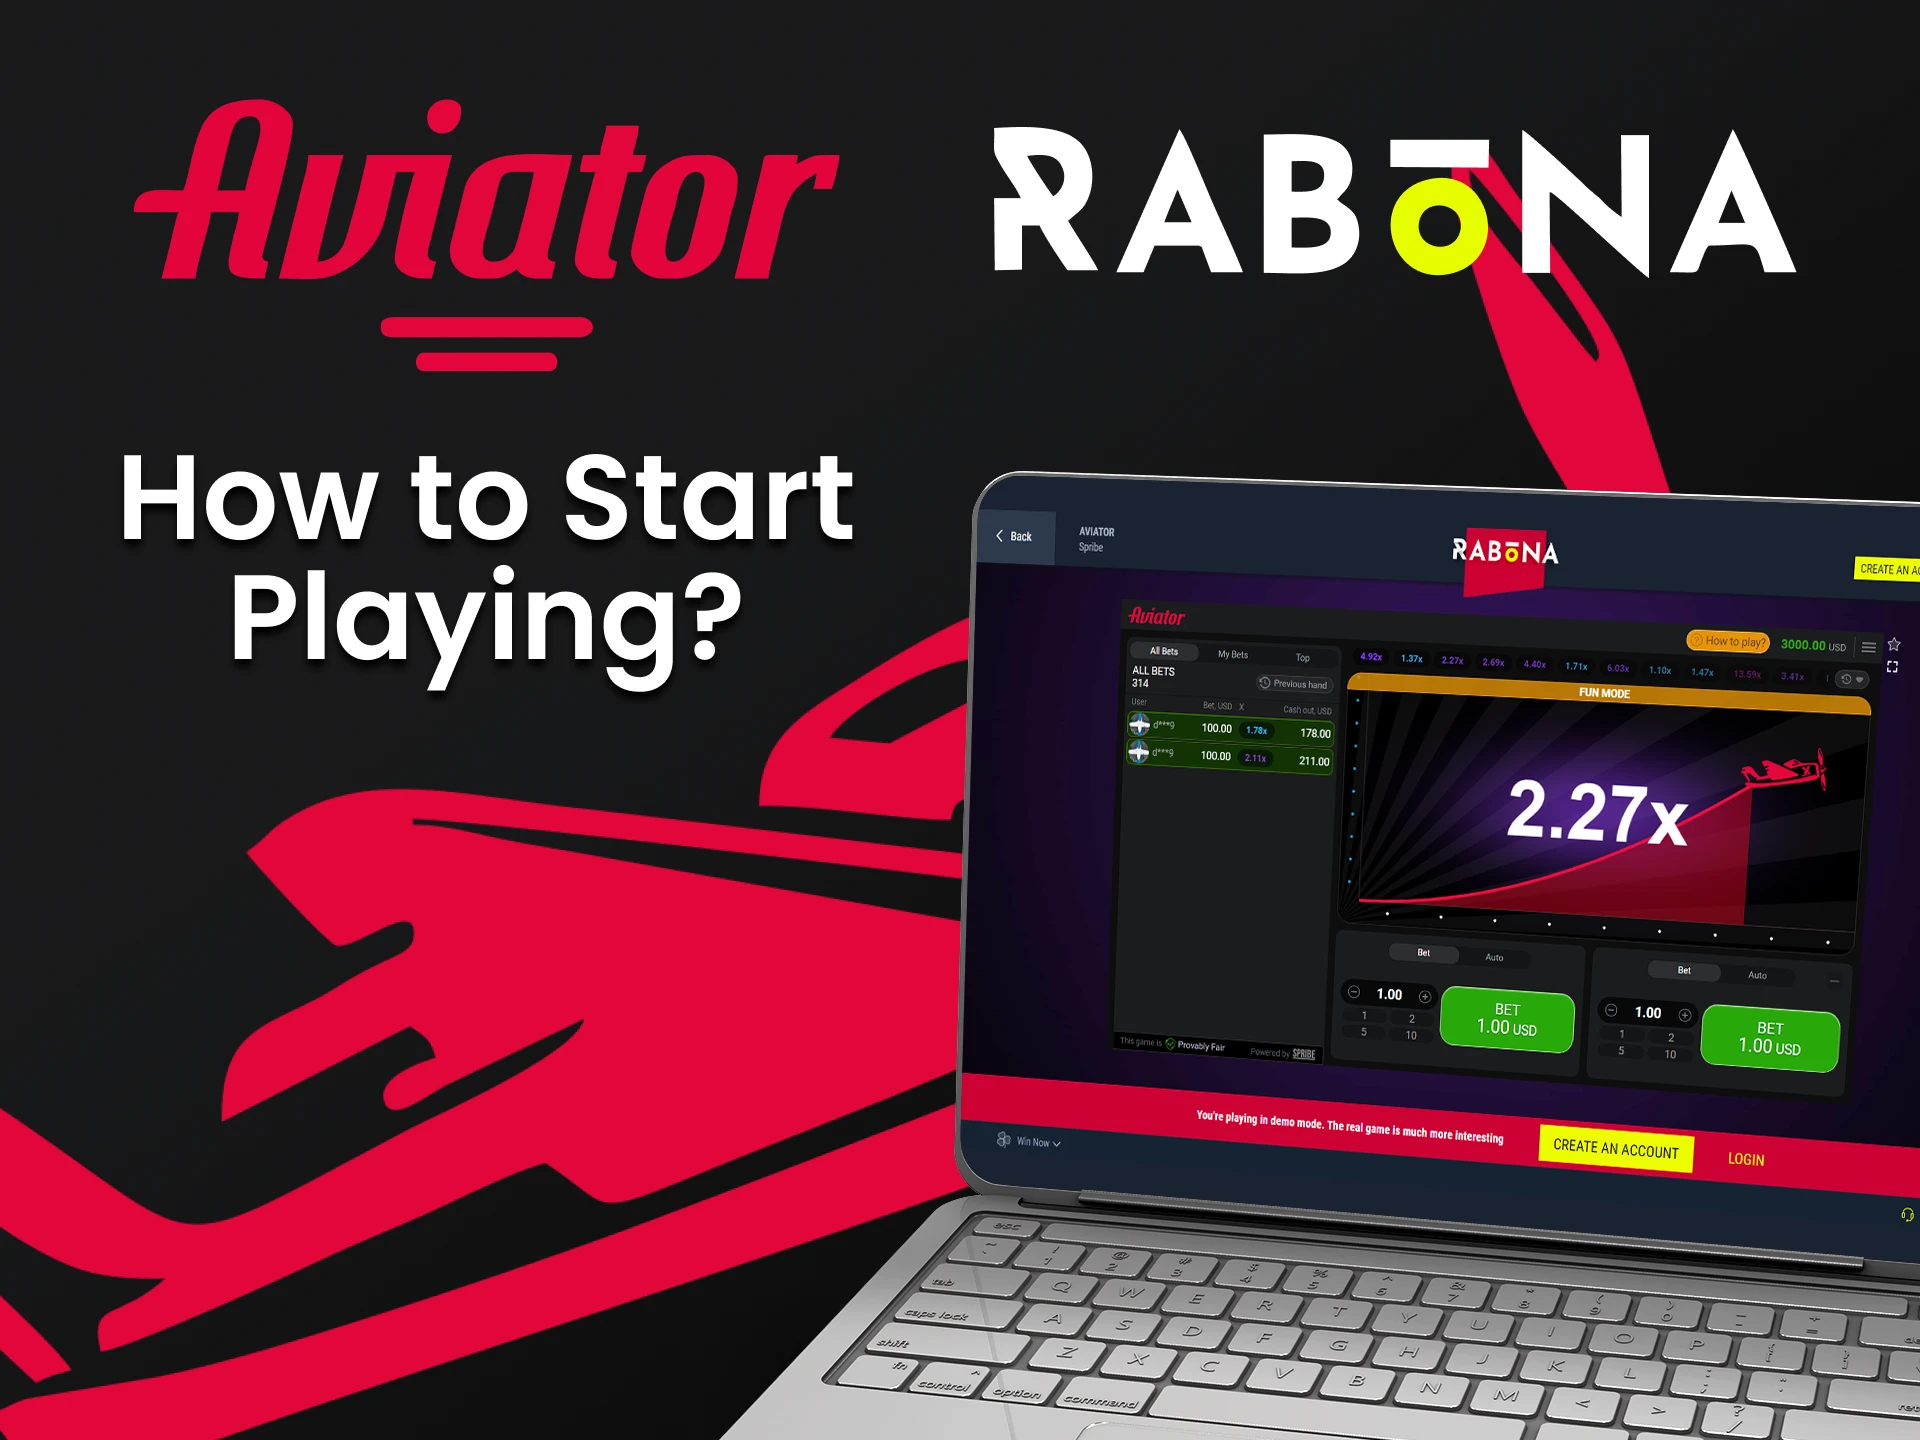 Choose Aviator from one of the Rabona sections.